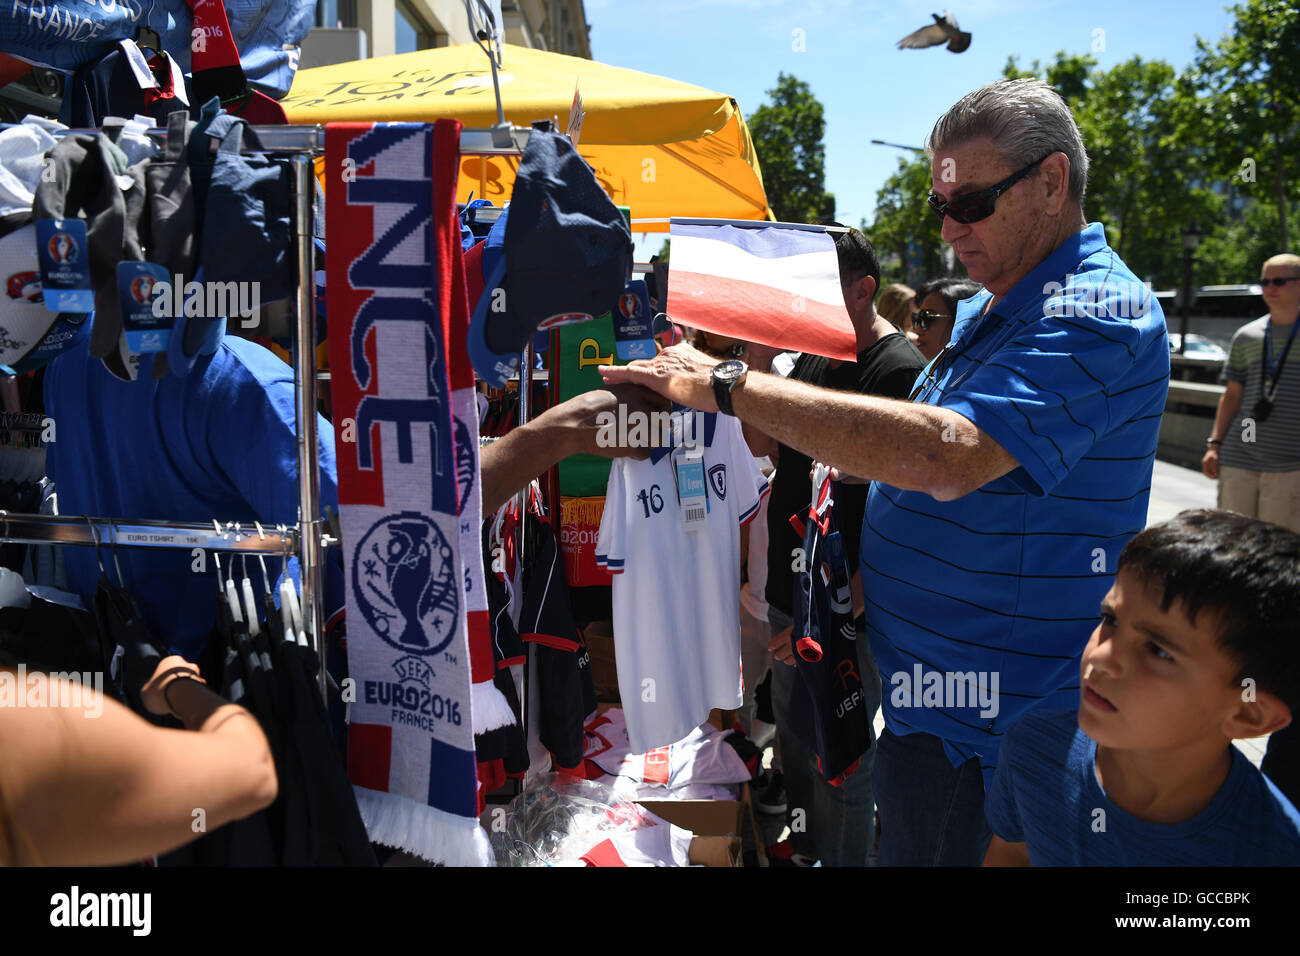 Paris, France. 09th July, 2016. A man looks at merchandise products of the French team at a souvenir shop at the Avenue des Champs-Elysees in Paris, France, 09 July 2016. Portugal face France in the UEFA EURO 2016 soccer Final match on 10 July 2016. Photo: Federico Gambarini/dpa/Alamy Live News Stock Photo